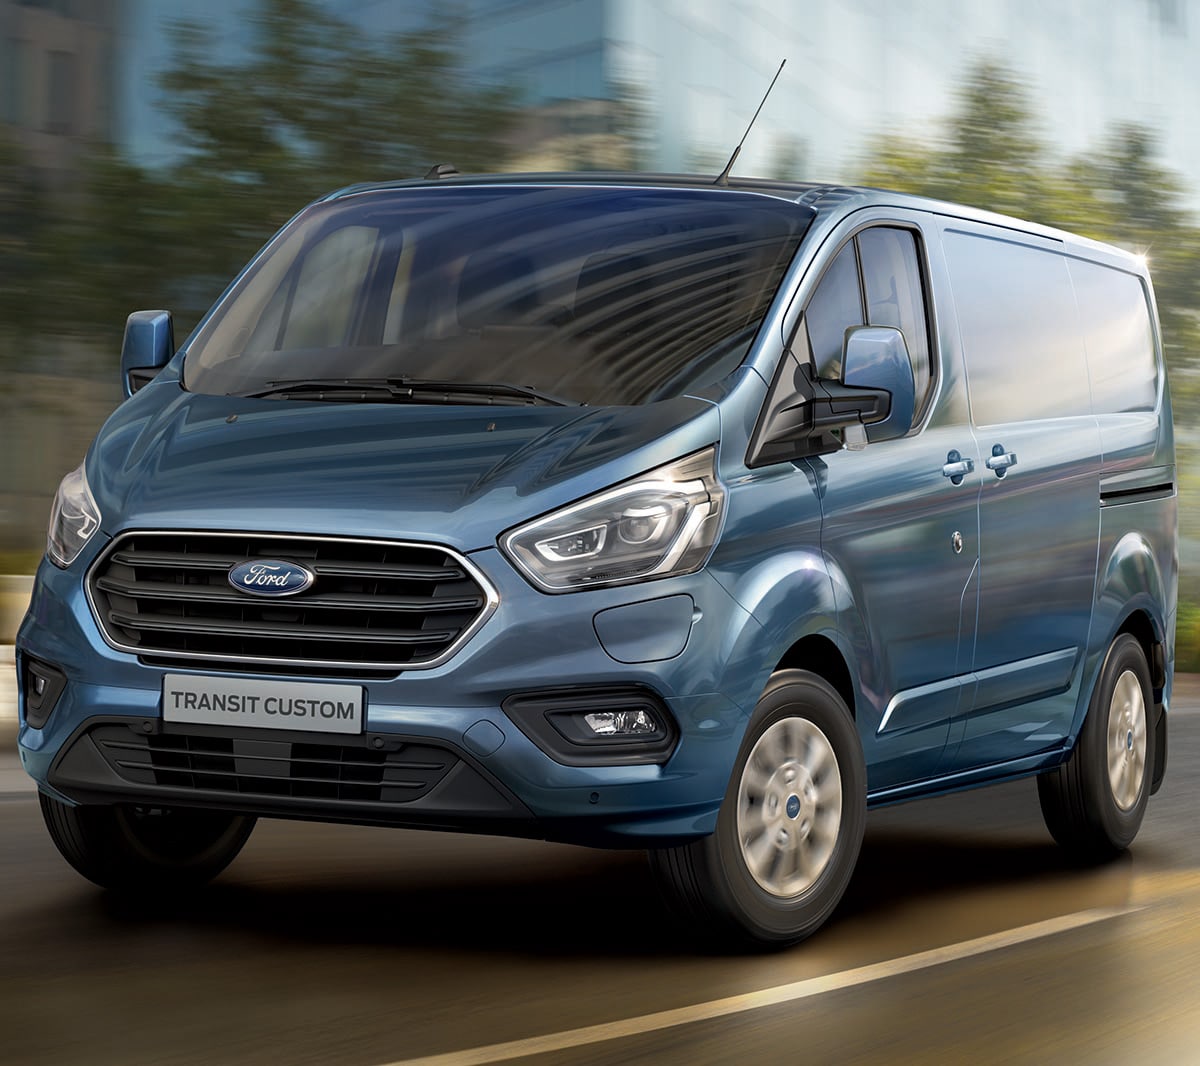 New Blue Ford Transit Custom driving on road